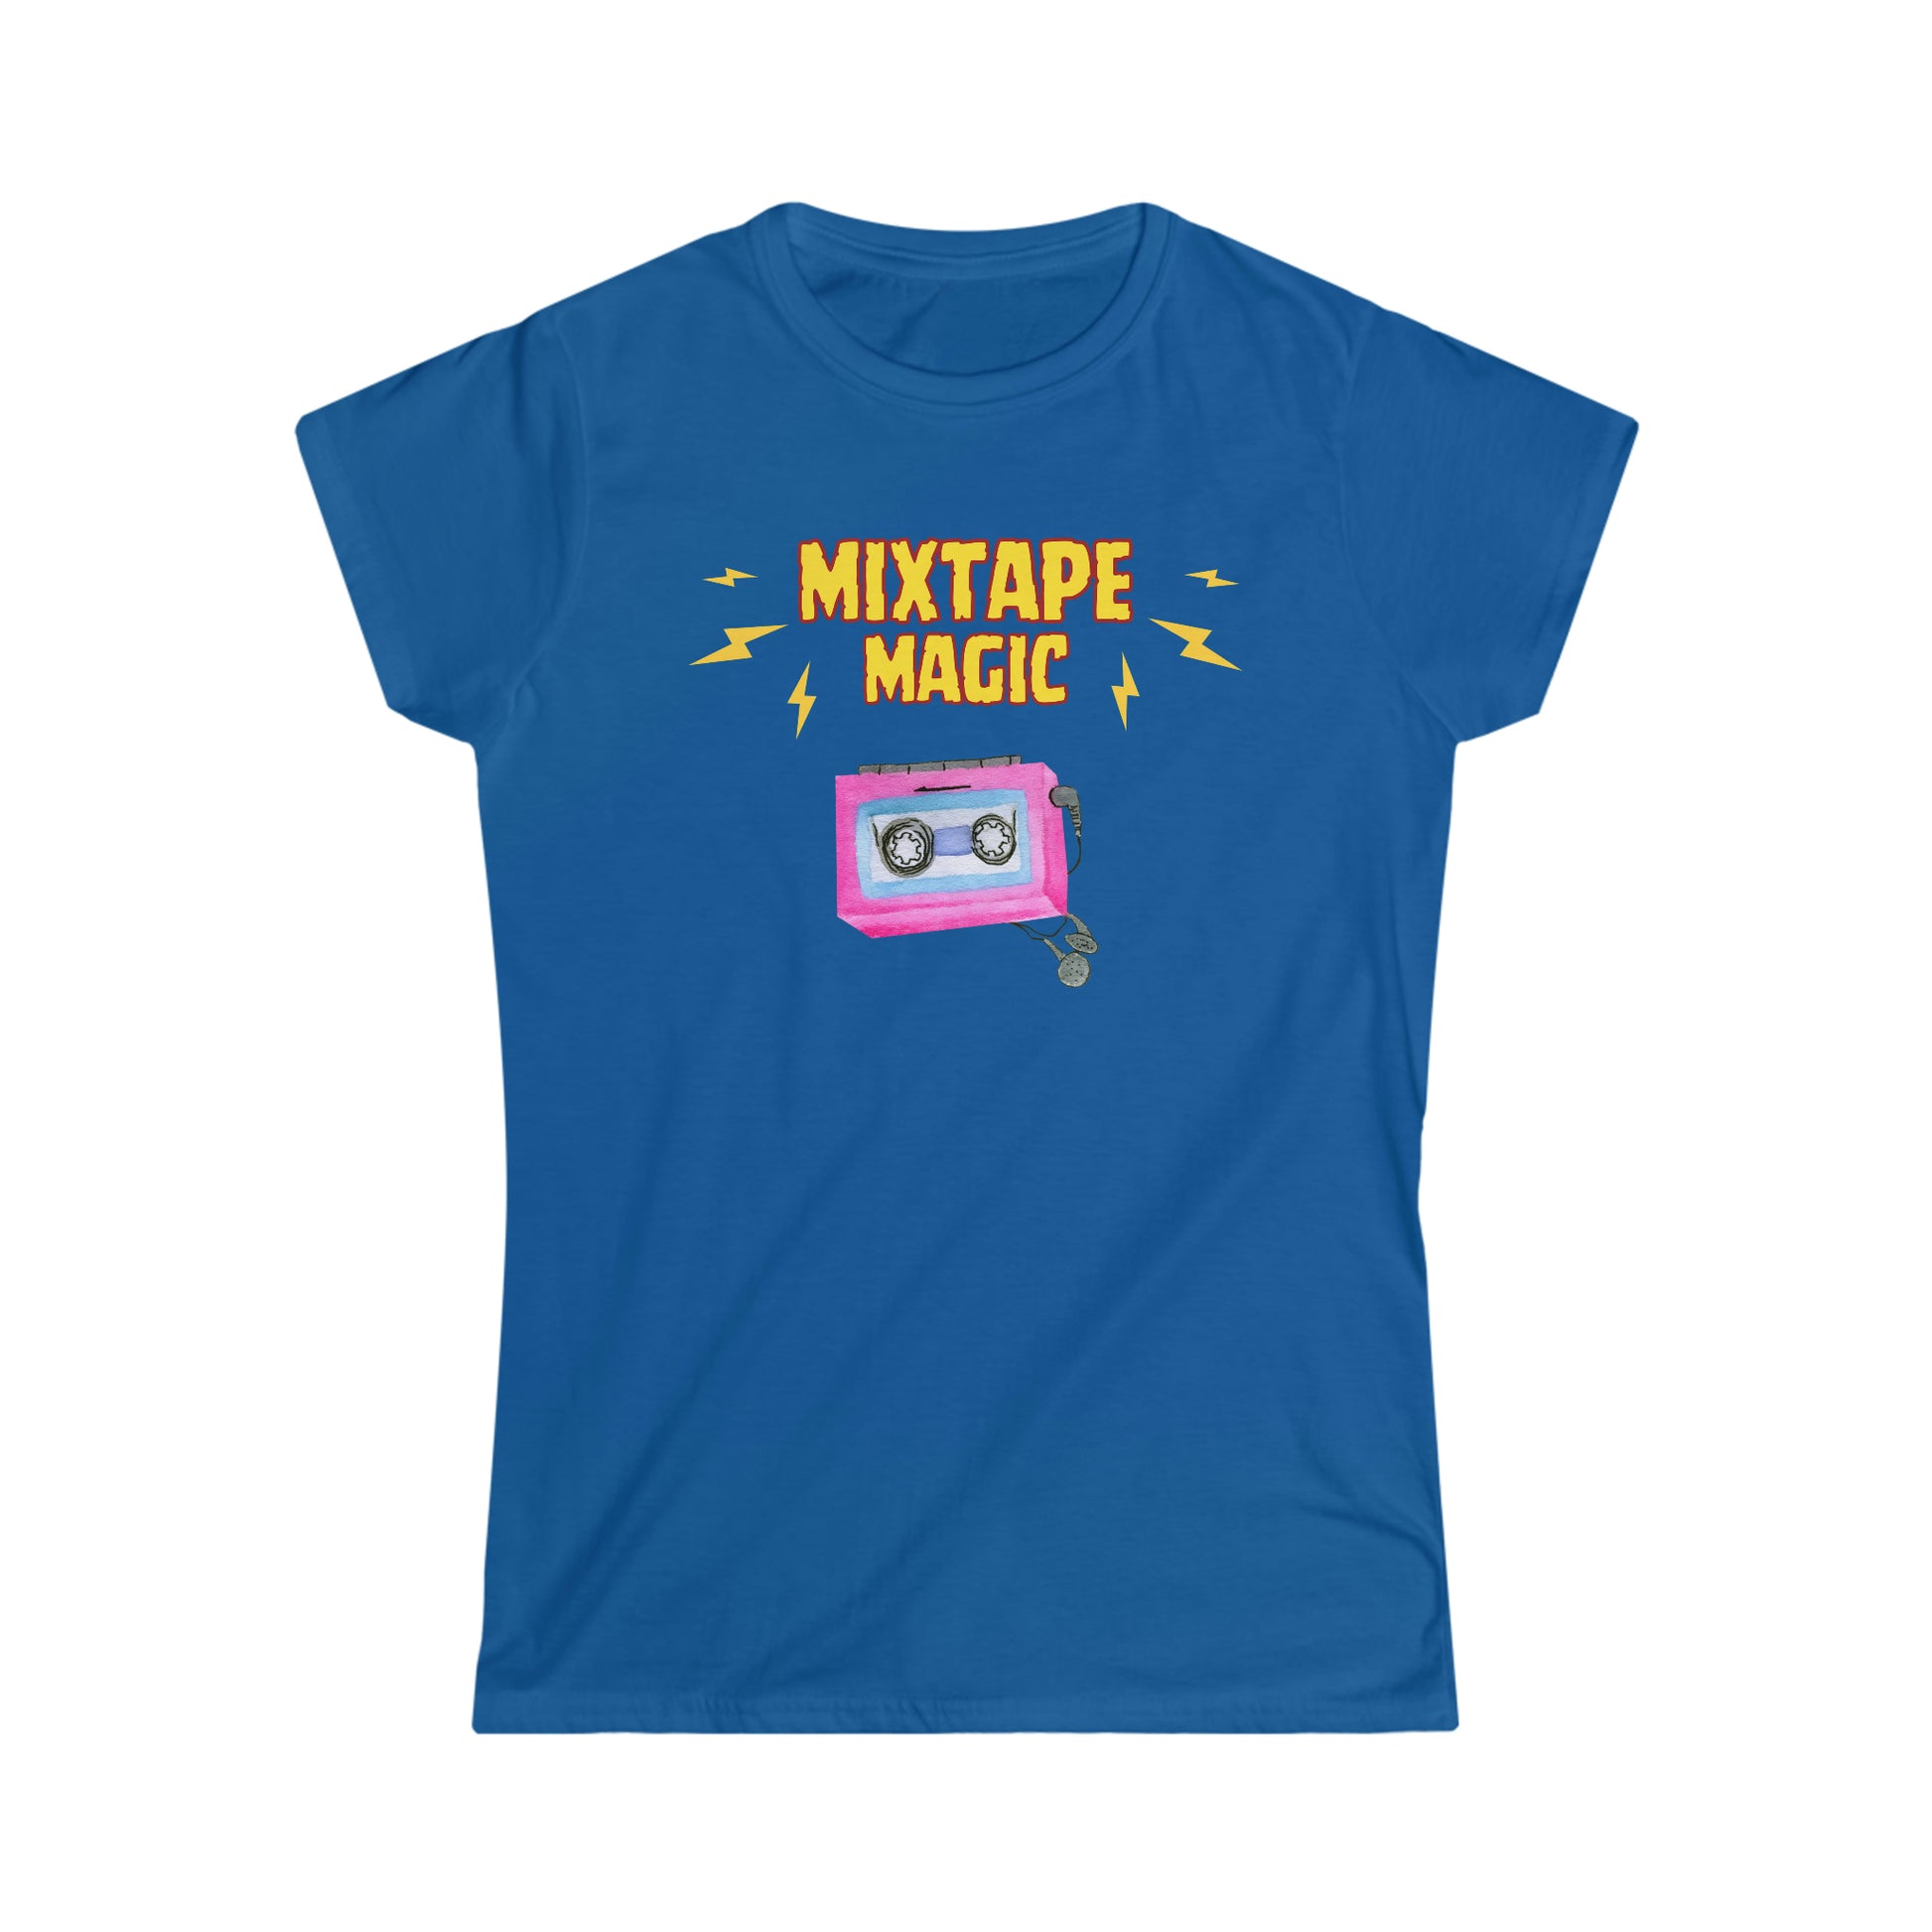 A T-shirt with the text "Mixtape magic" and a picture of a cassette player with headphones